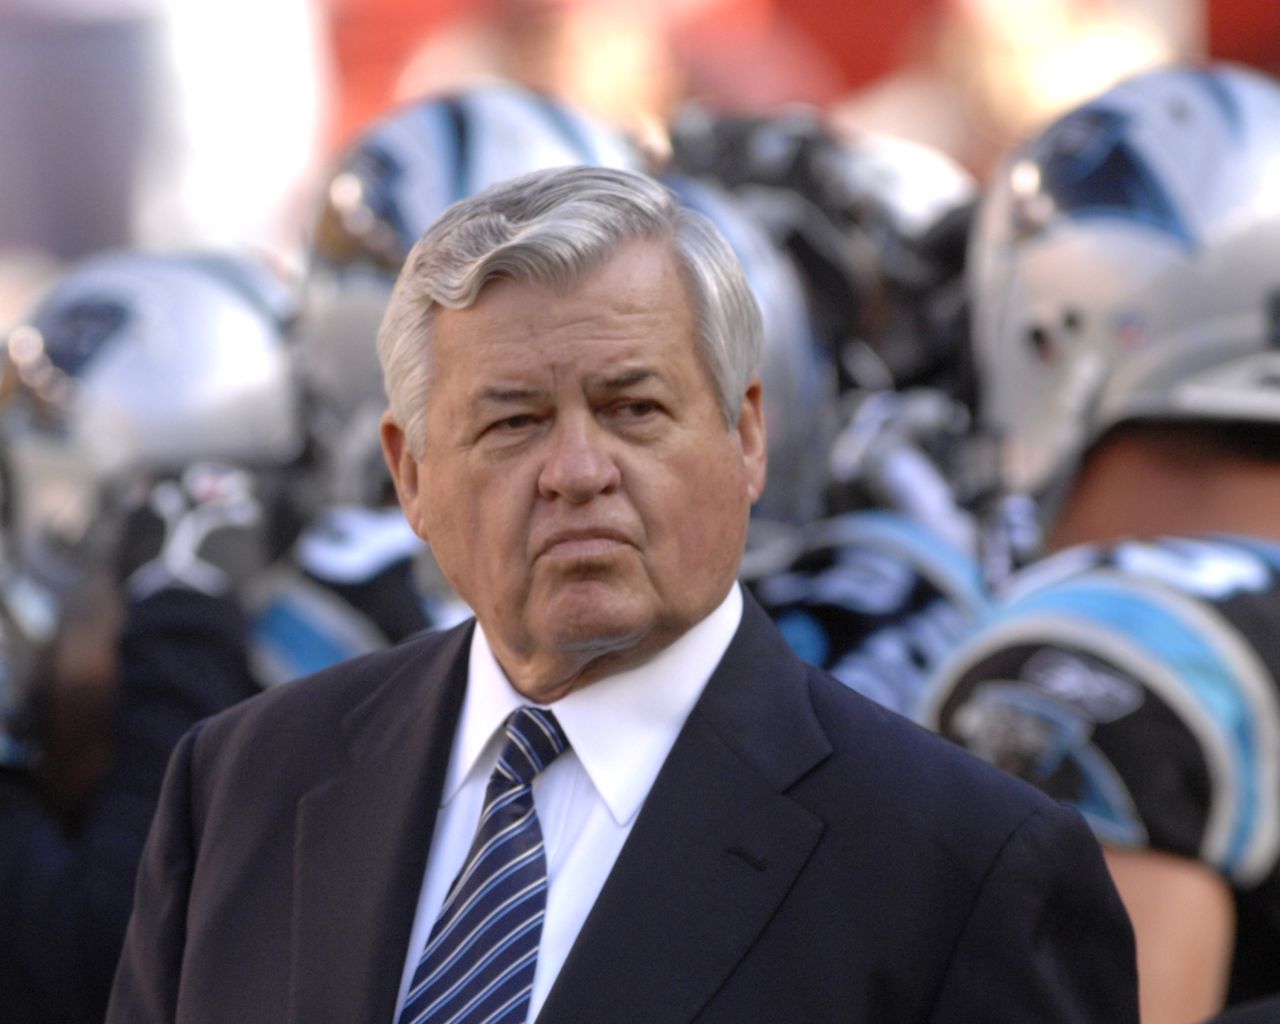 Though the Carolina Panthers owner had a short NFL career, it was a memorable one. As a Baltimore Colt, he caught a touchdown pass in the 1959 NFL championship game, the Colts' second straight title. And then, upset with his contract, he walked away to open a fast-food restaurant named Hardee's. More than 30 years later, a millionaire many times over, he bought into the NFL.